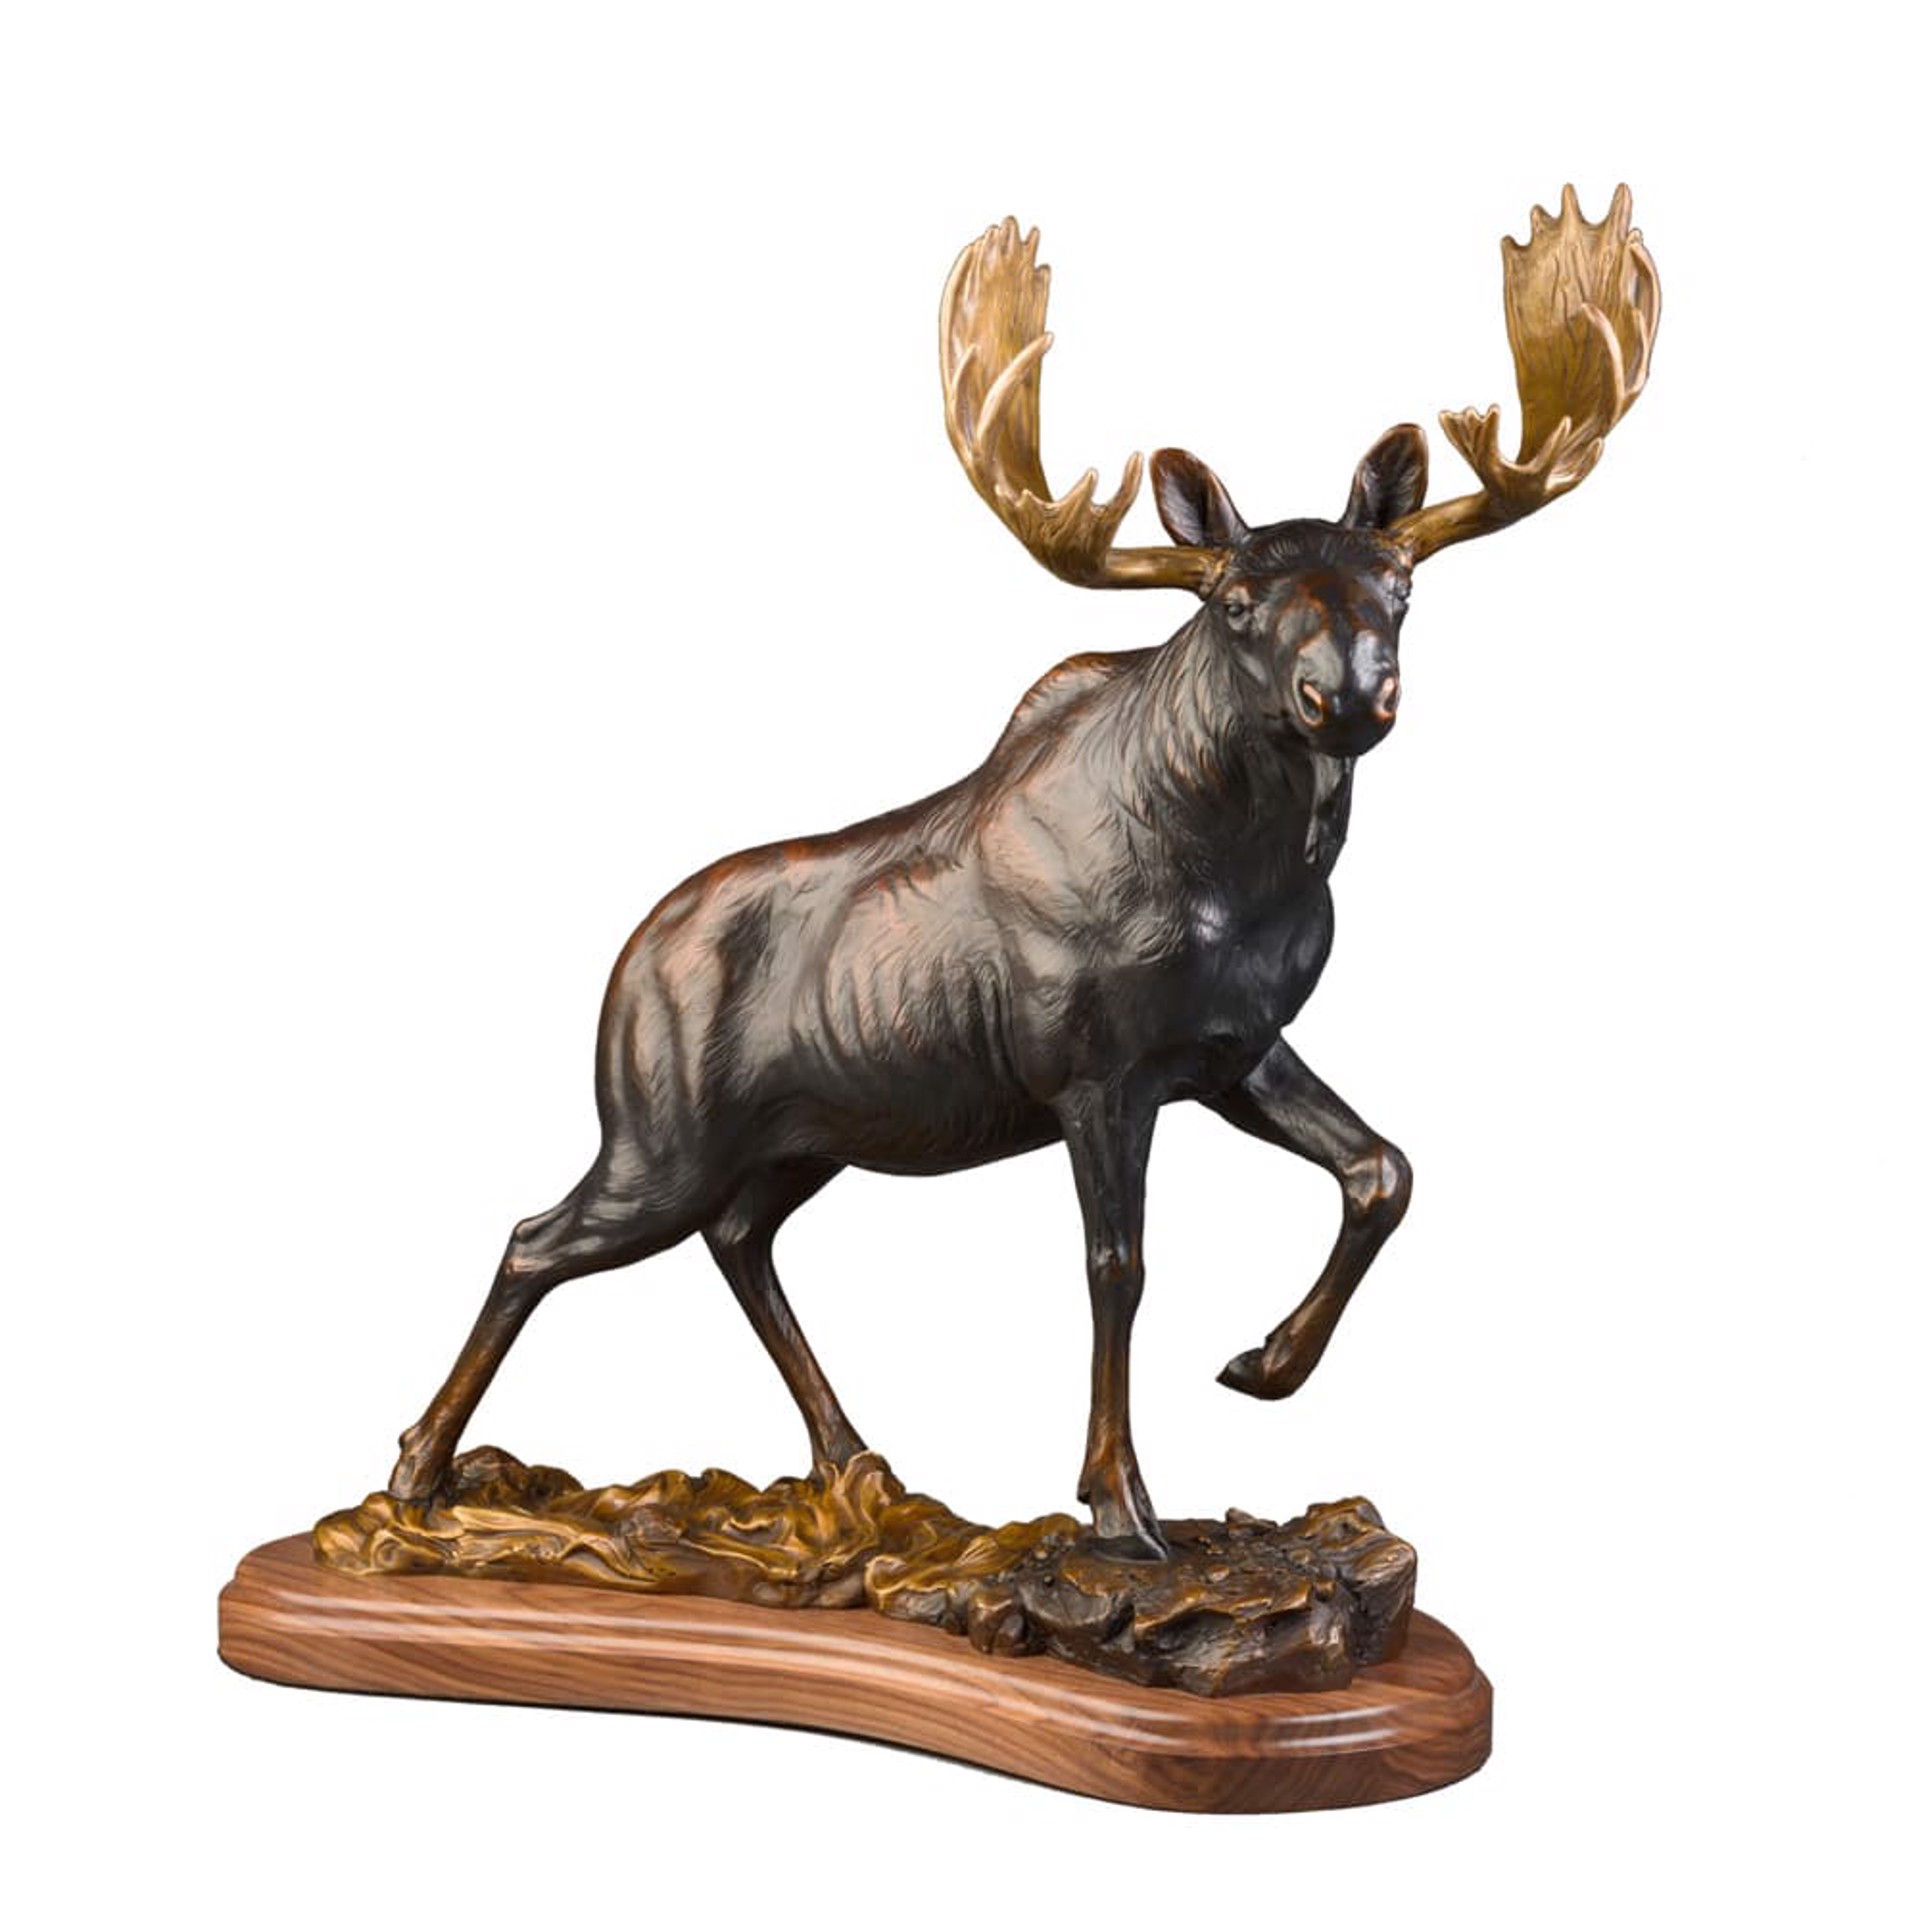 A Bronze Of A Bull Moose Available At Gallery Wild